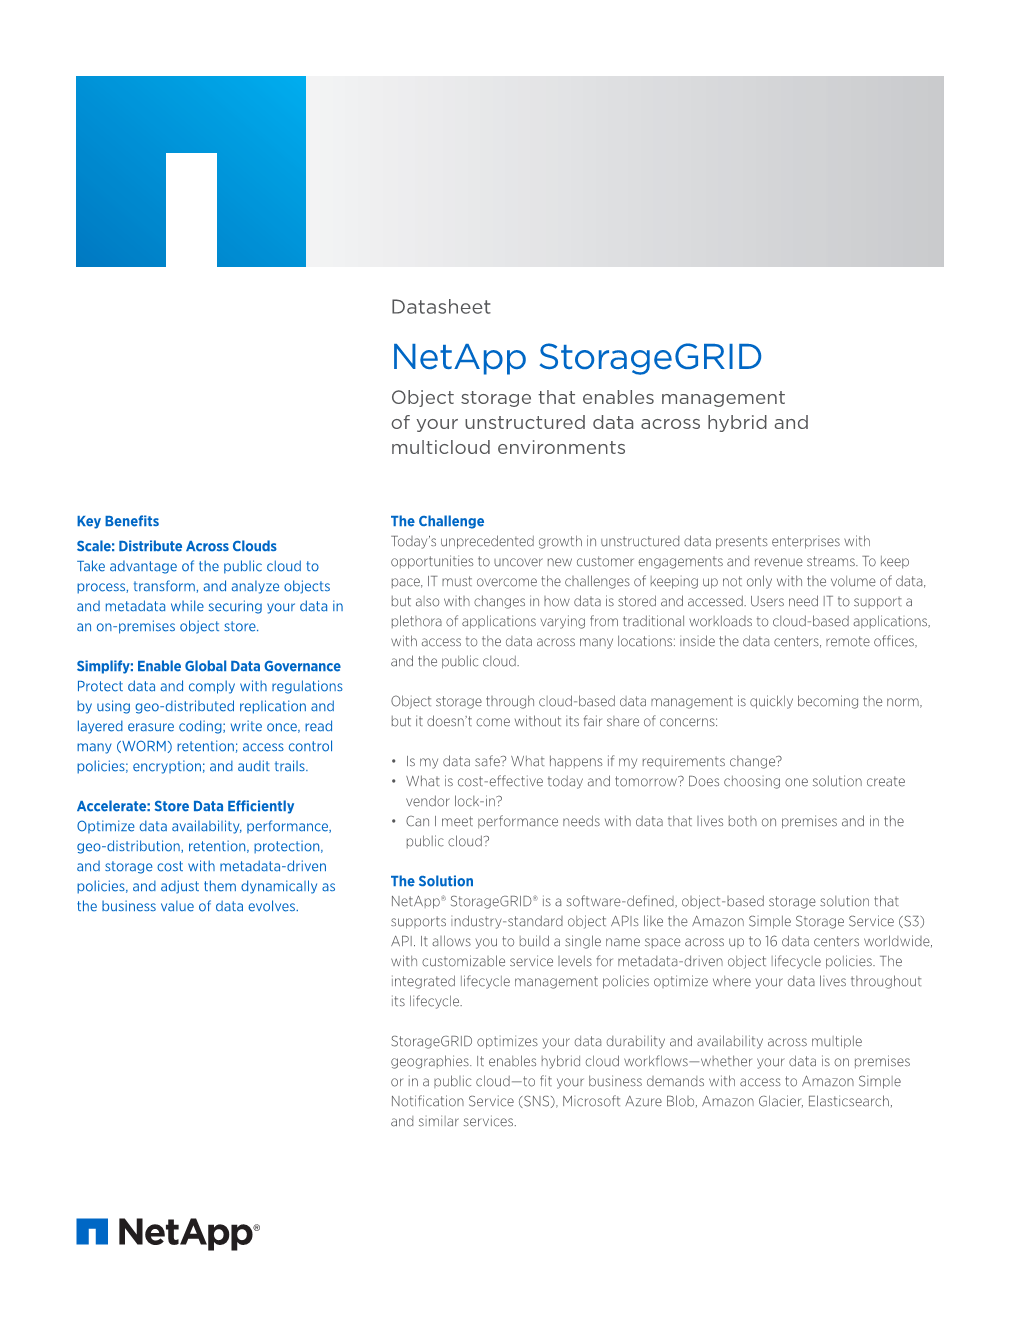 Netapp Storagegrid Object Storage That Enables Management of Your Unstructured Data Across Hybrid and Multicloud Environments